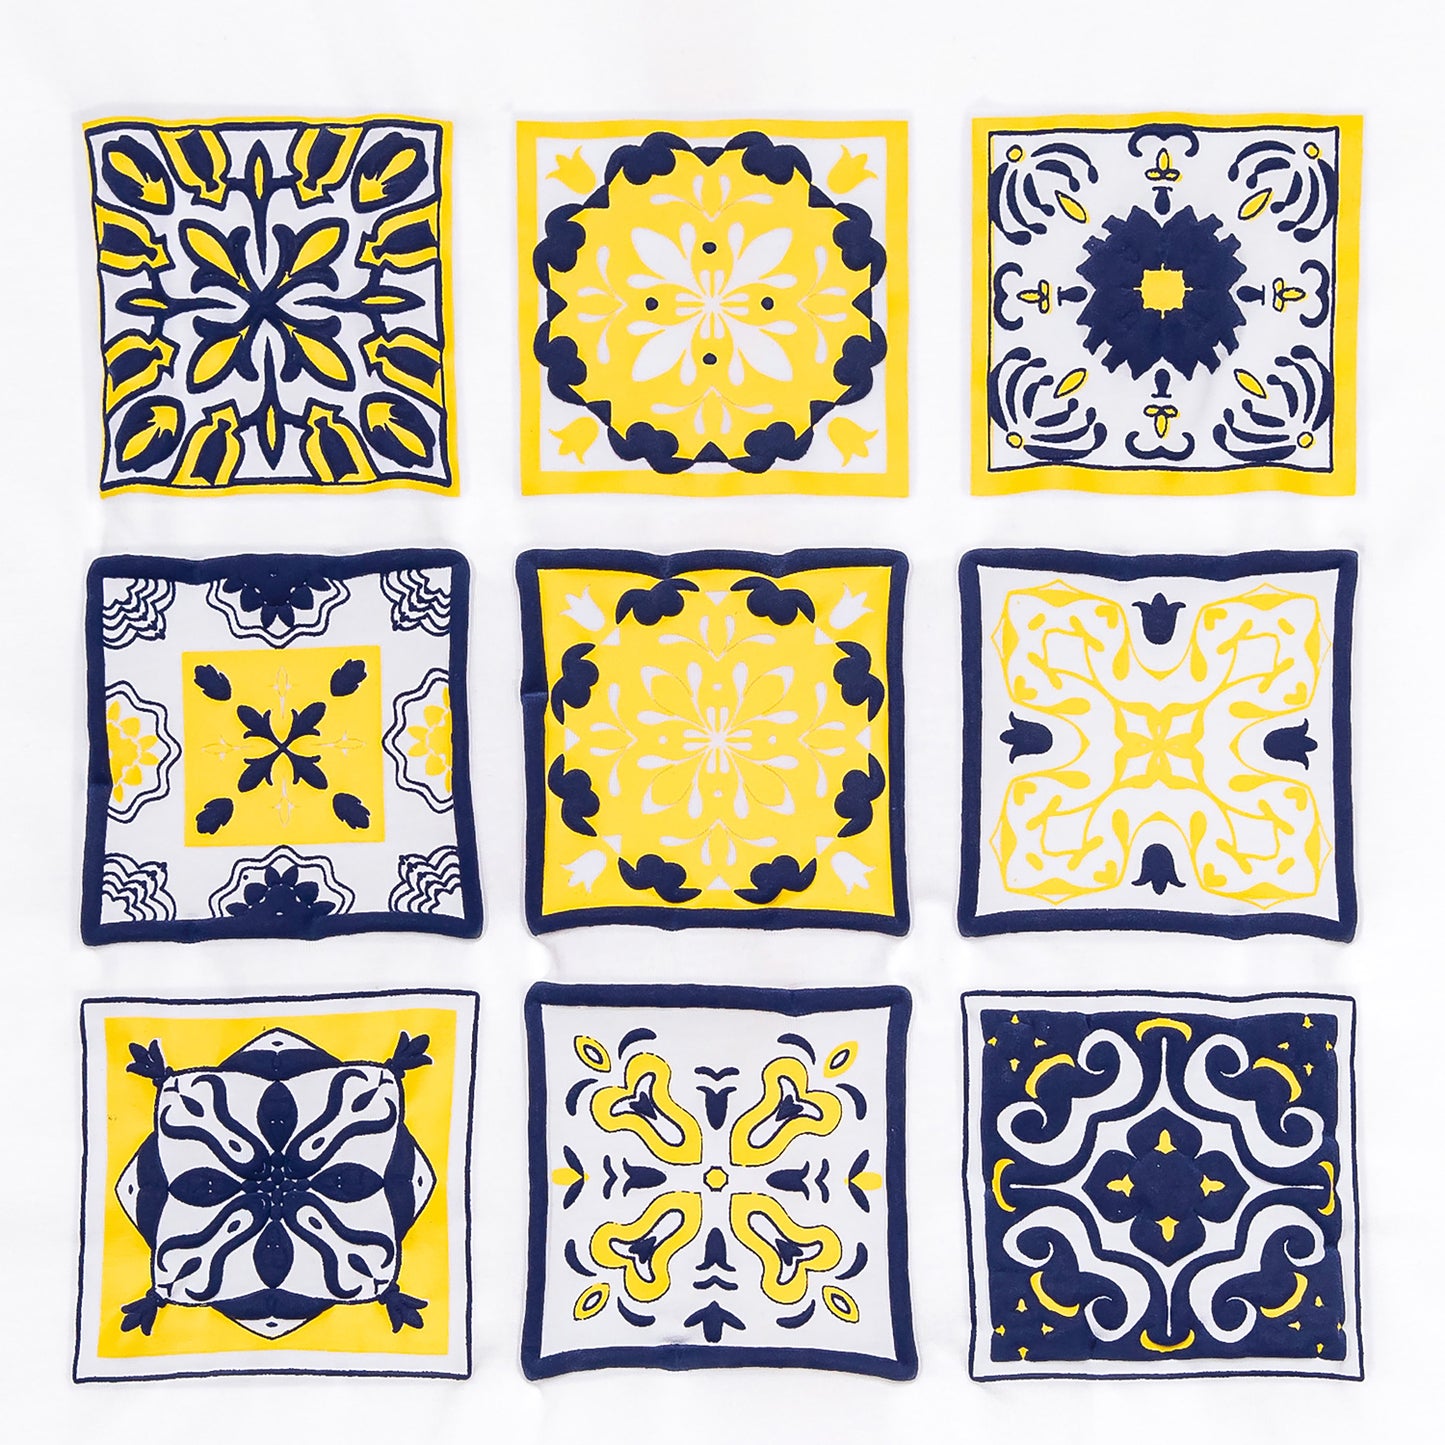 Mudejar tiles, white T-shirt, Tee, screen printing, lose tee, relaxed fit, beautiful shirt, woman, blue and yellow print, detail